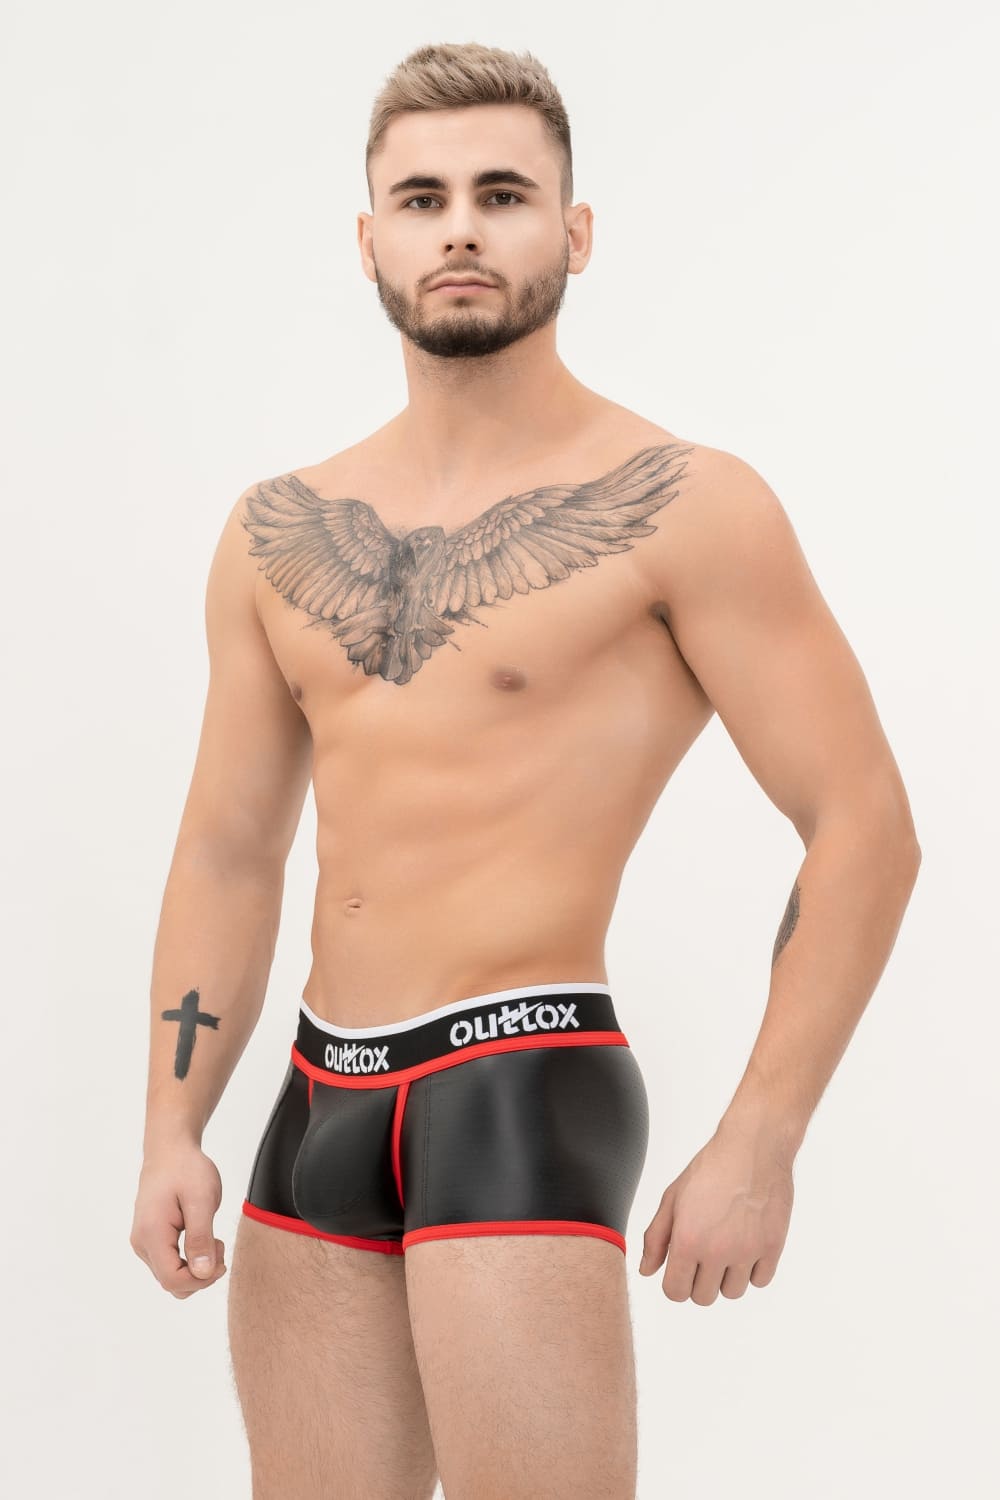 Outtox. Wrapped Rear Trunk Shorts with Snap Codpiece. Black+Red